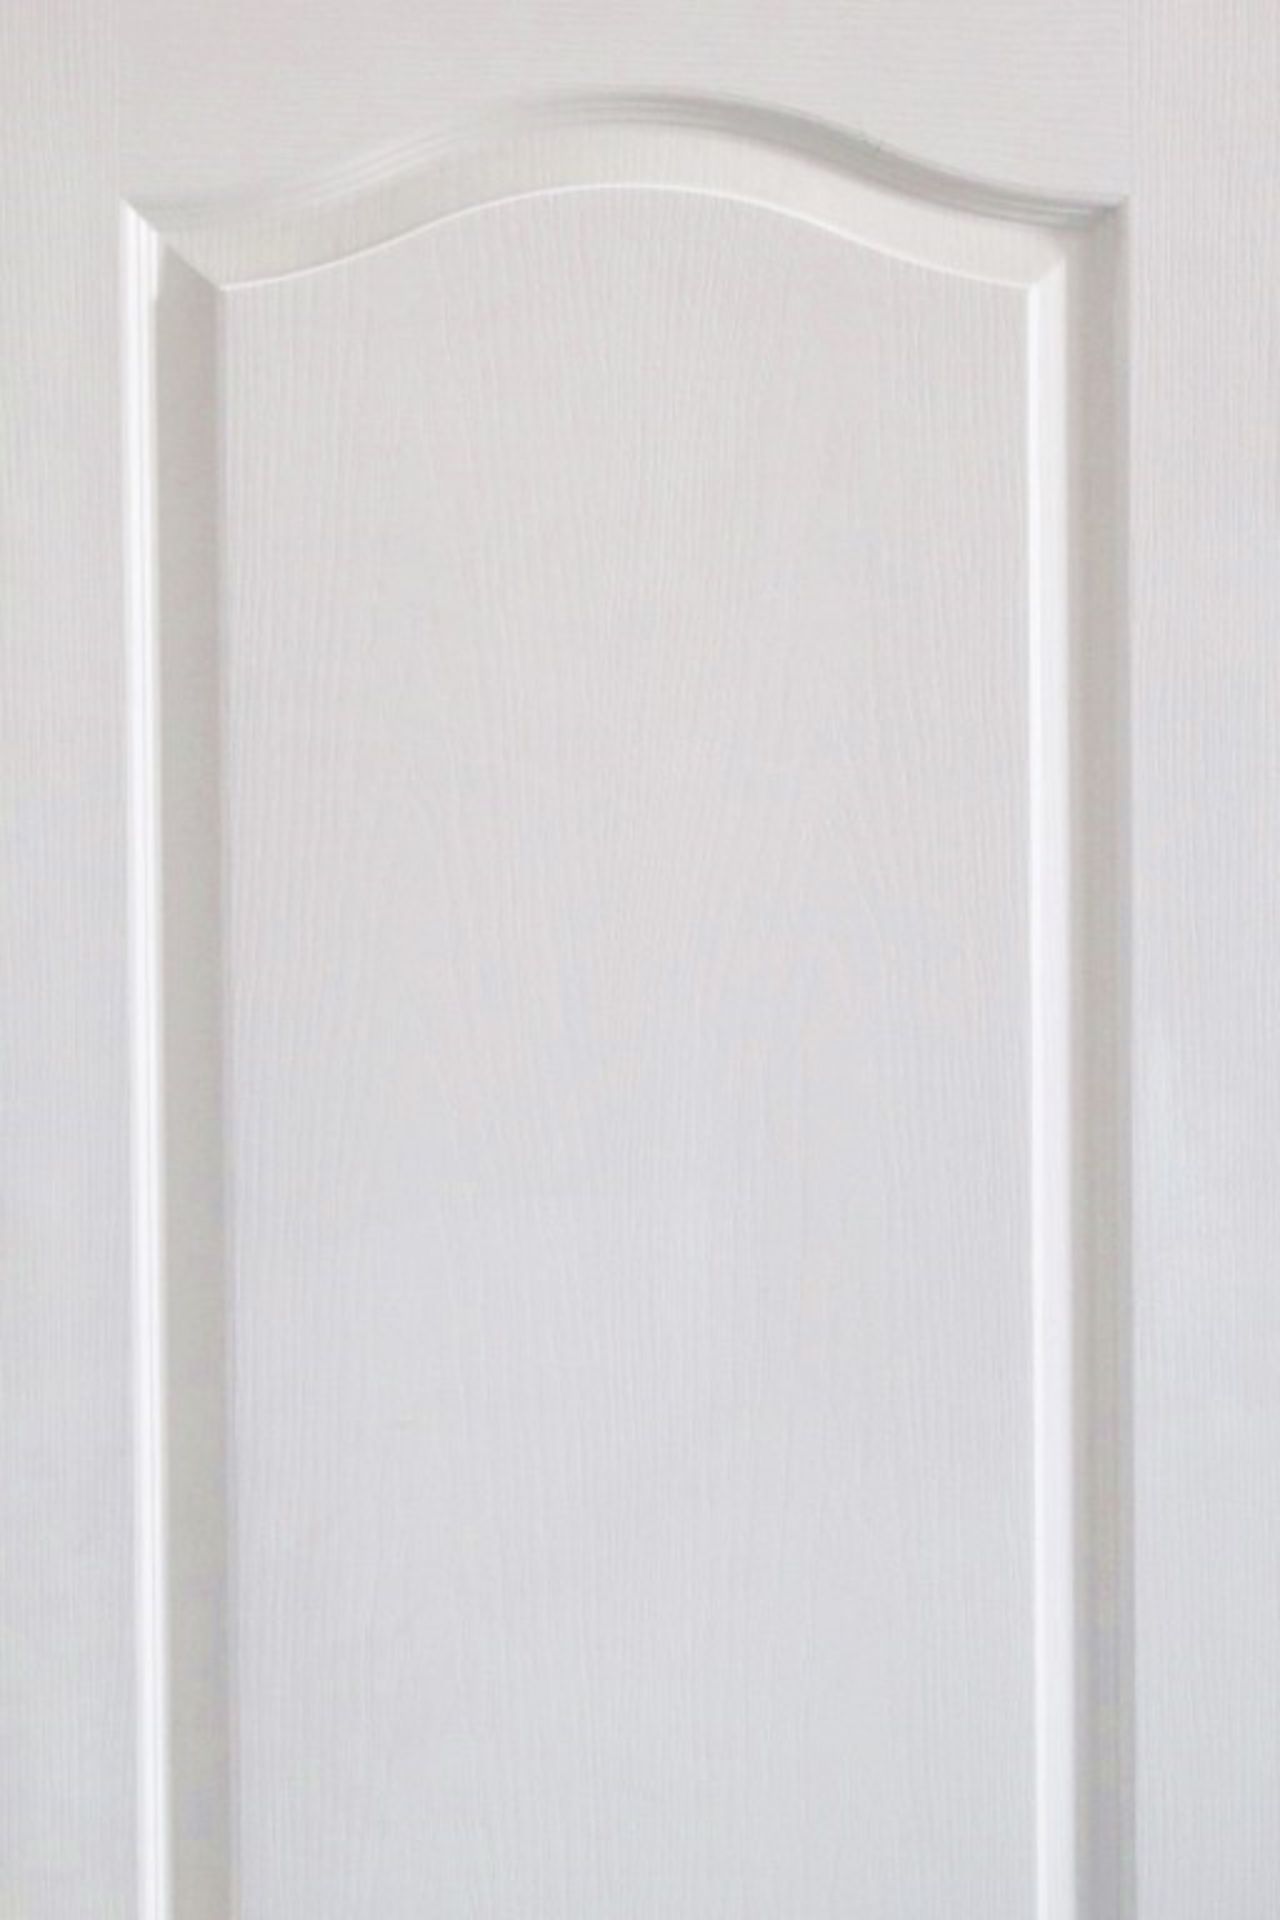 1 x Solid Wood Interior Fire Door - In Good Condition, Complete With Brass Handles and Hinges - Image 2 of 6